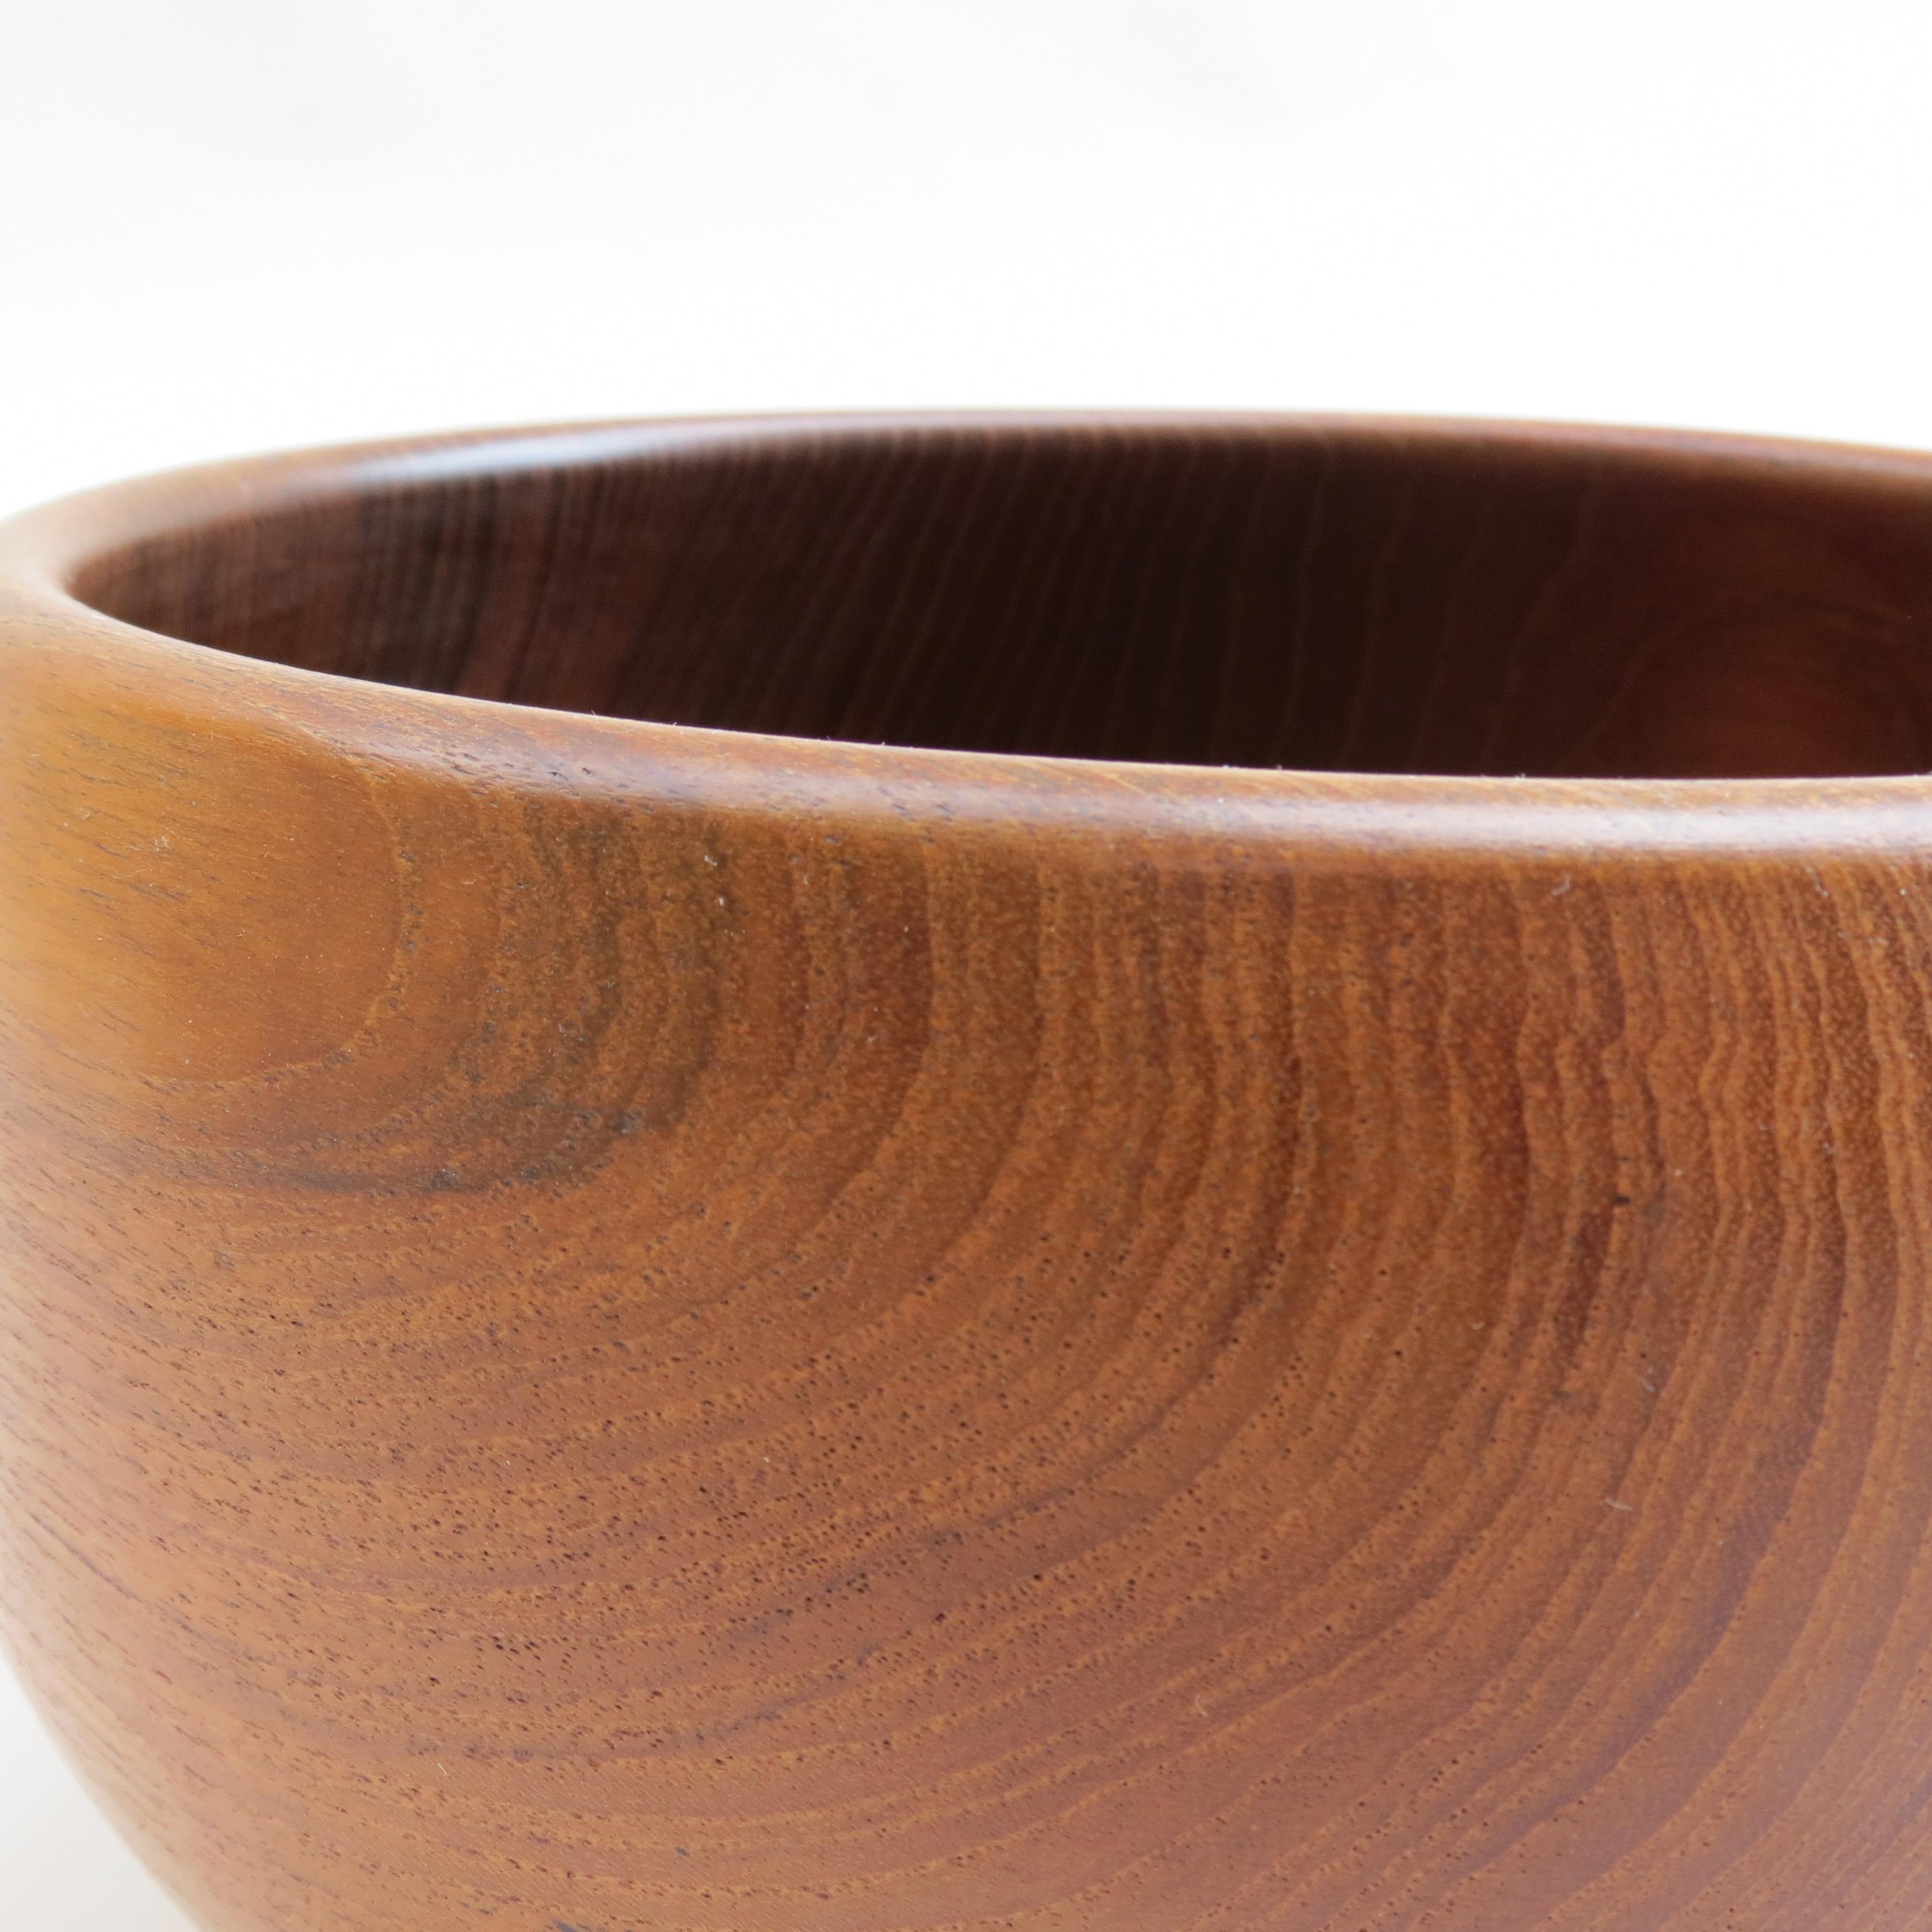 20th Century Midcentury Large Handcrafted Teak Wooden Bowl by Galatix, England, 1970s